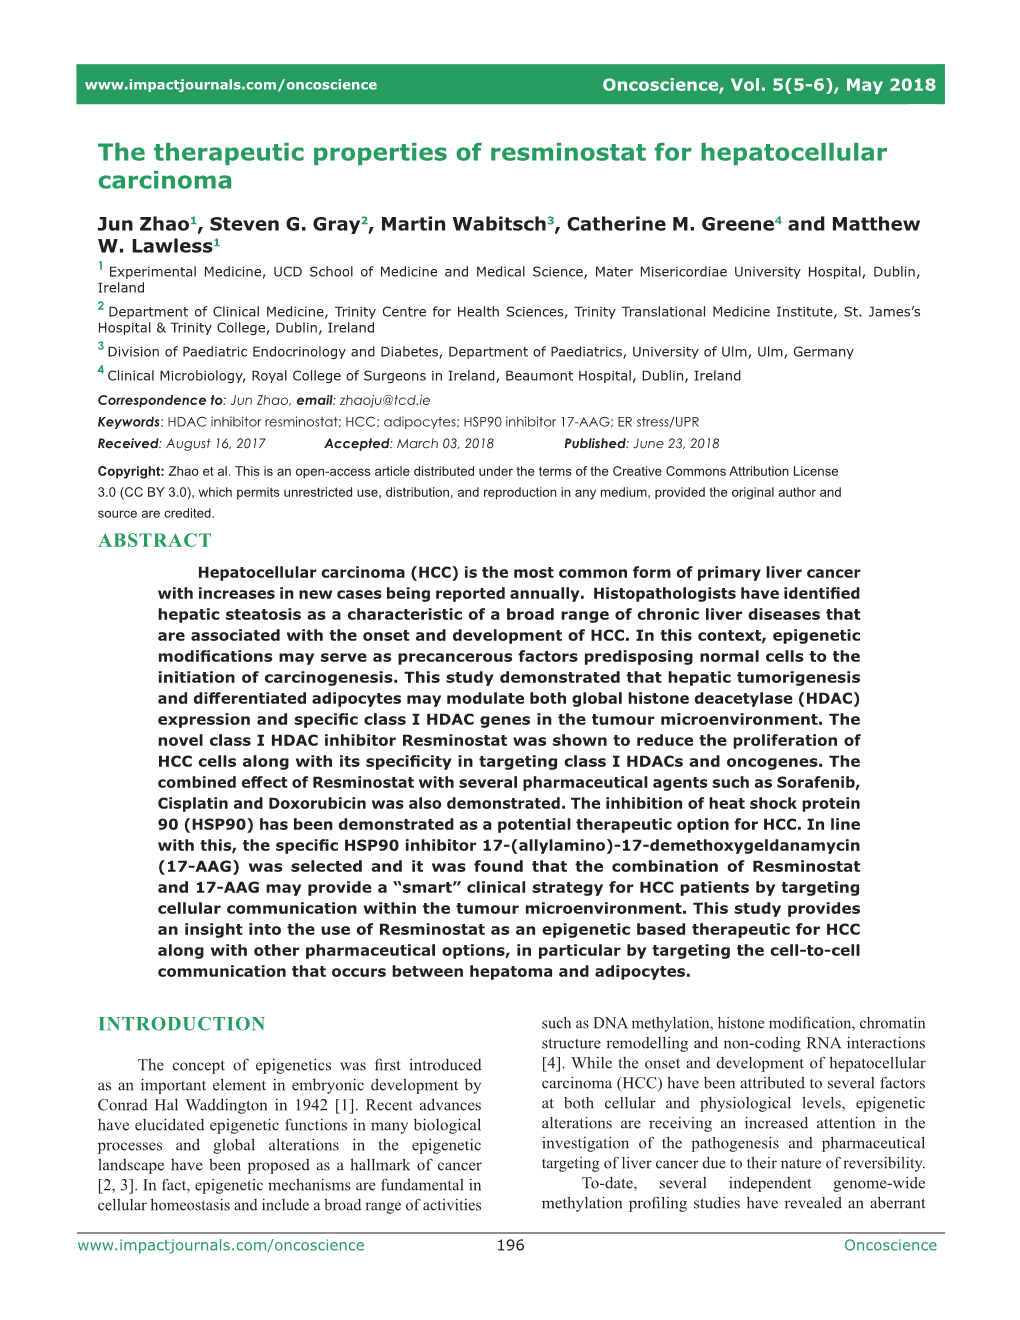 The Therapeutic Properties of Resminostat for Hepatocellular Carcinoma